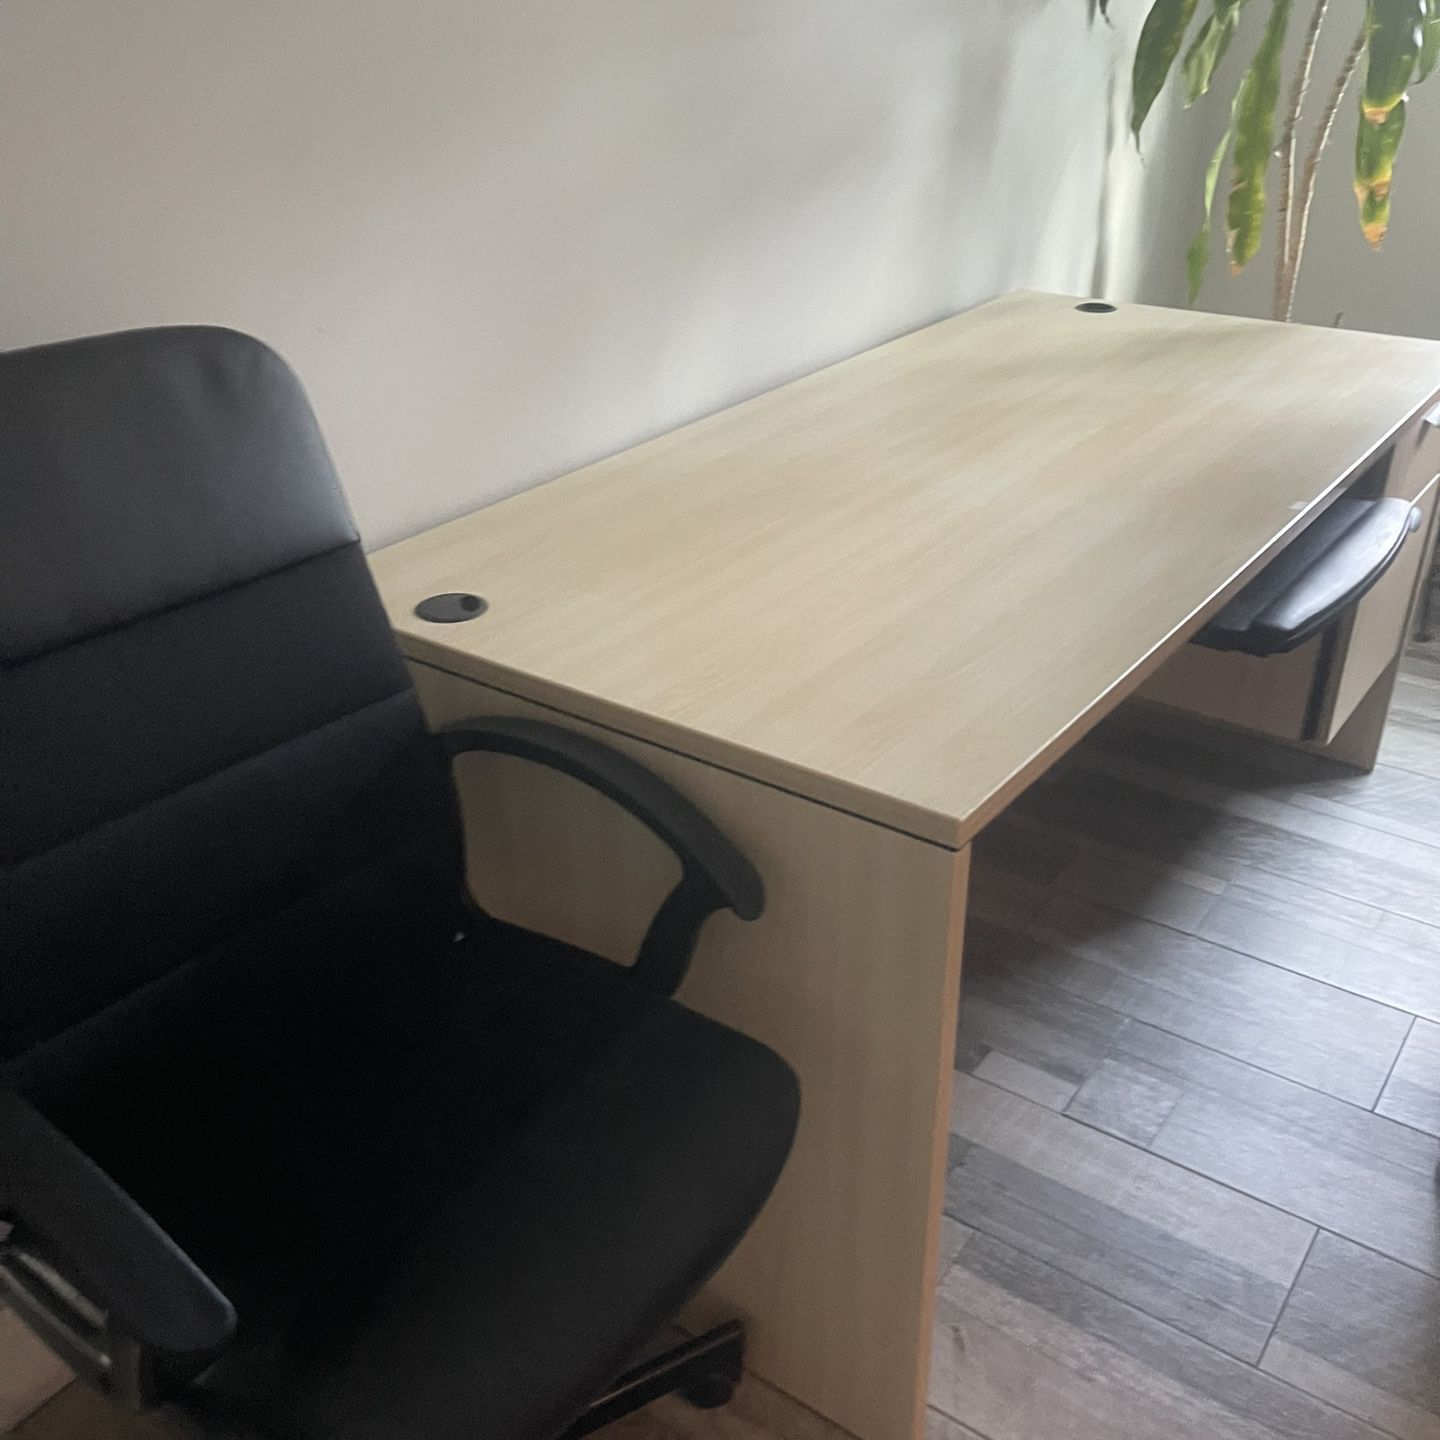 2 Desks And 1 Office Chair 